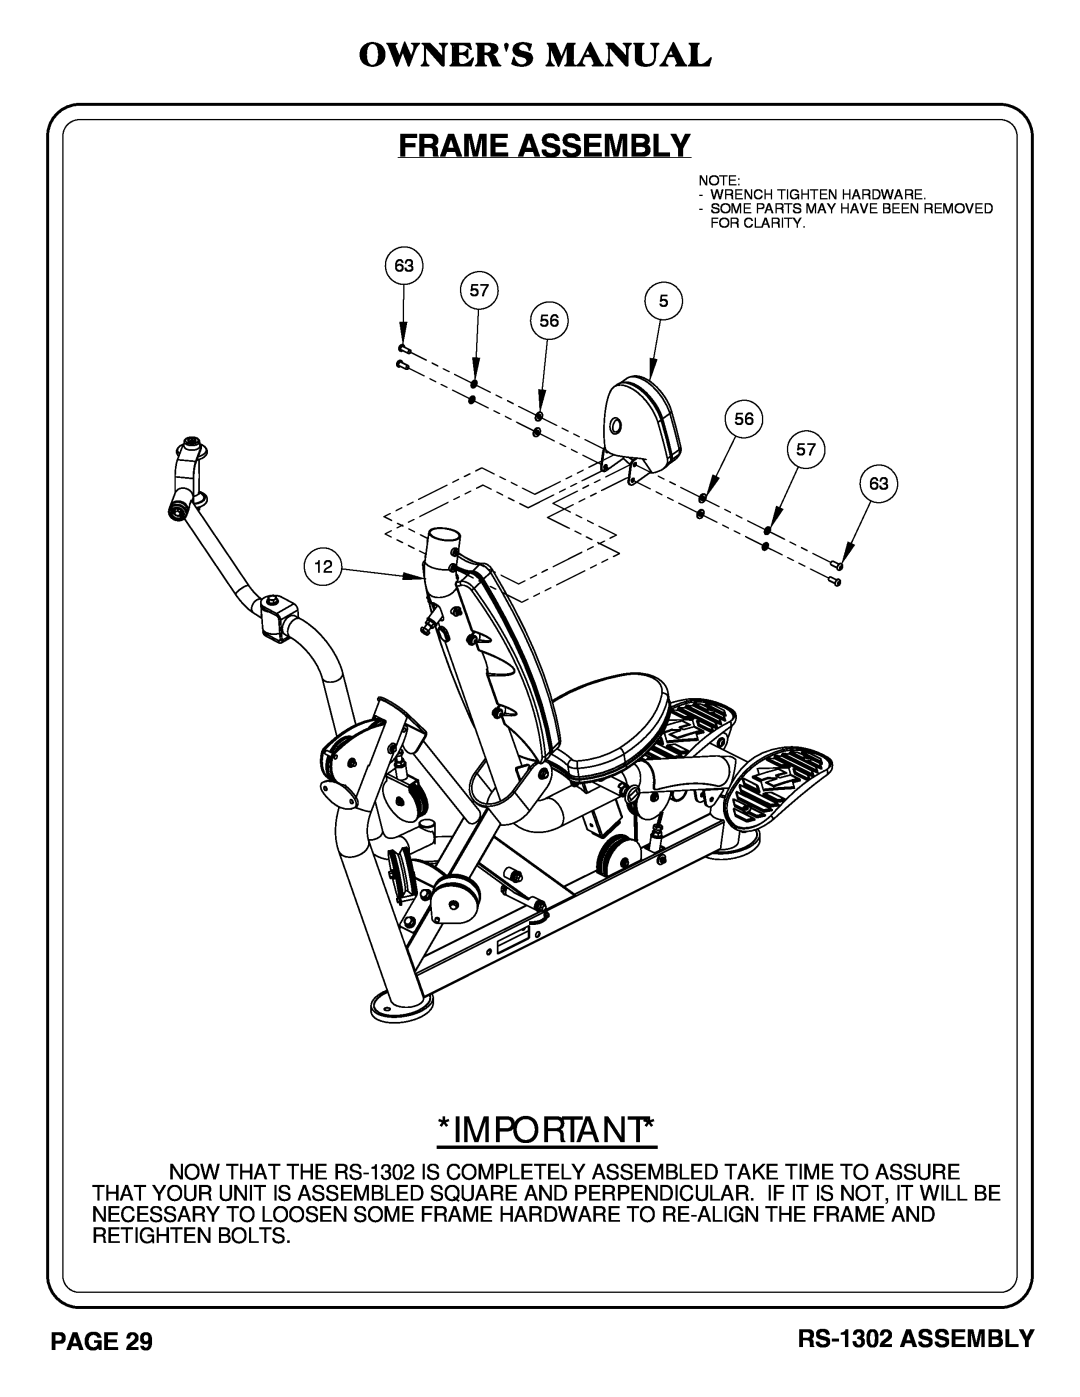 Hoist Fitness owner manual Owners Manual Frame Assembly, RS-1302 ASSEMBLY 